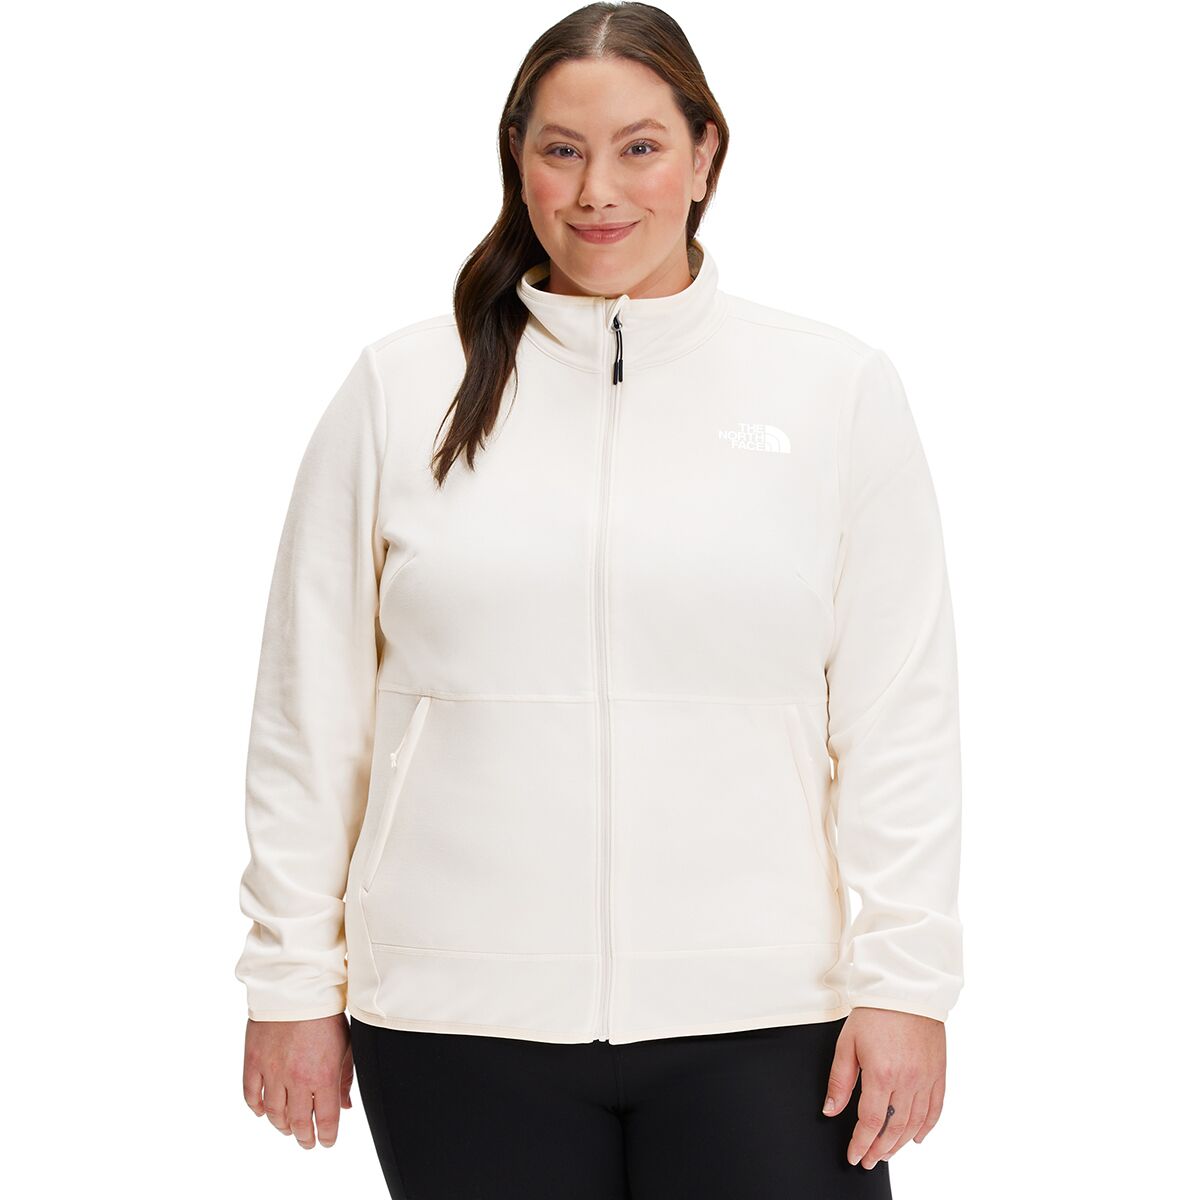 The North Face Canyonlands Plus Full-Zip Jacket - Women's